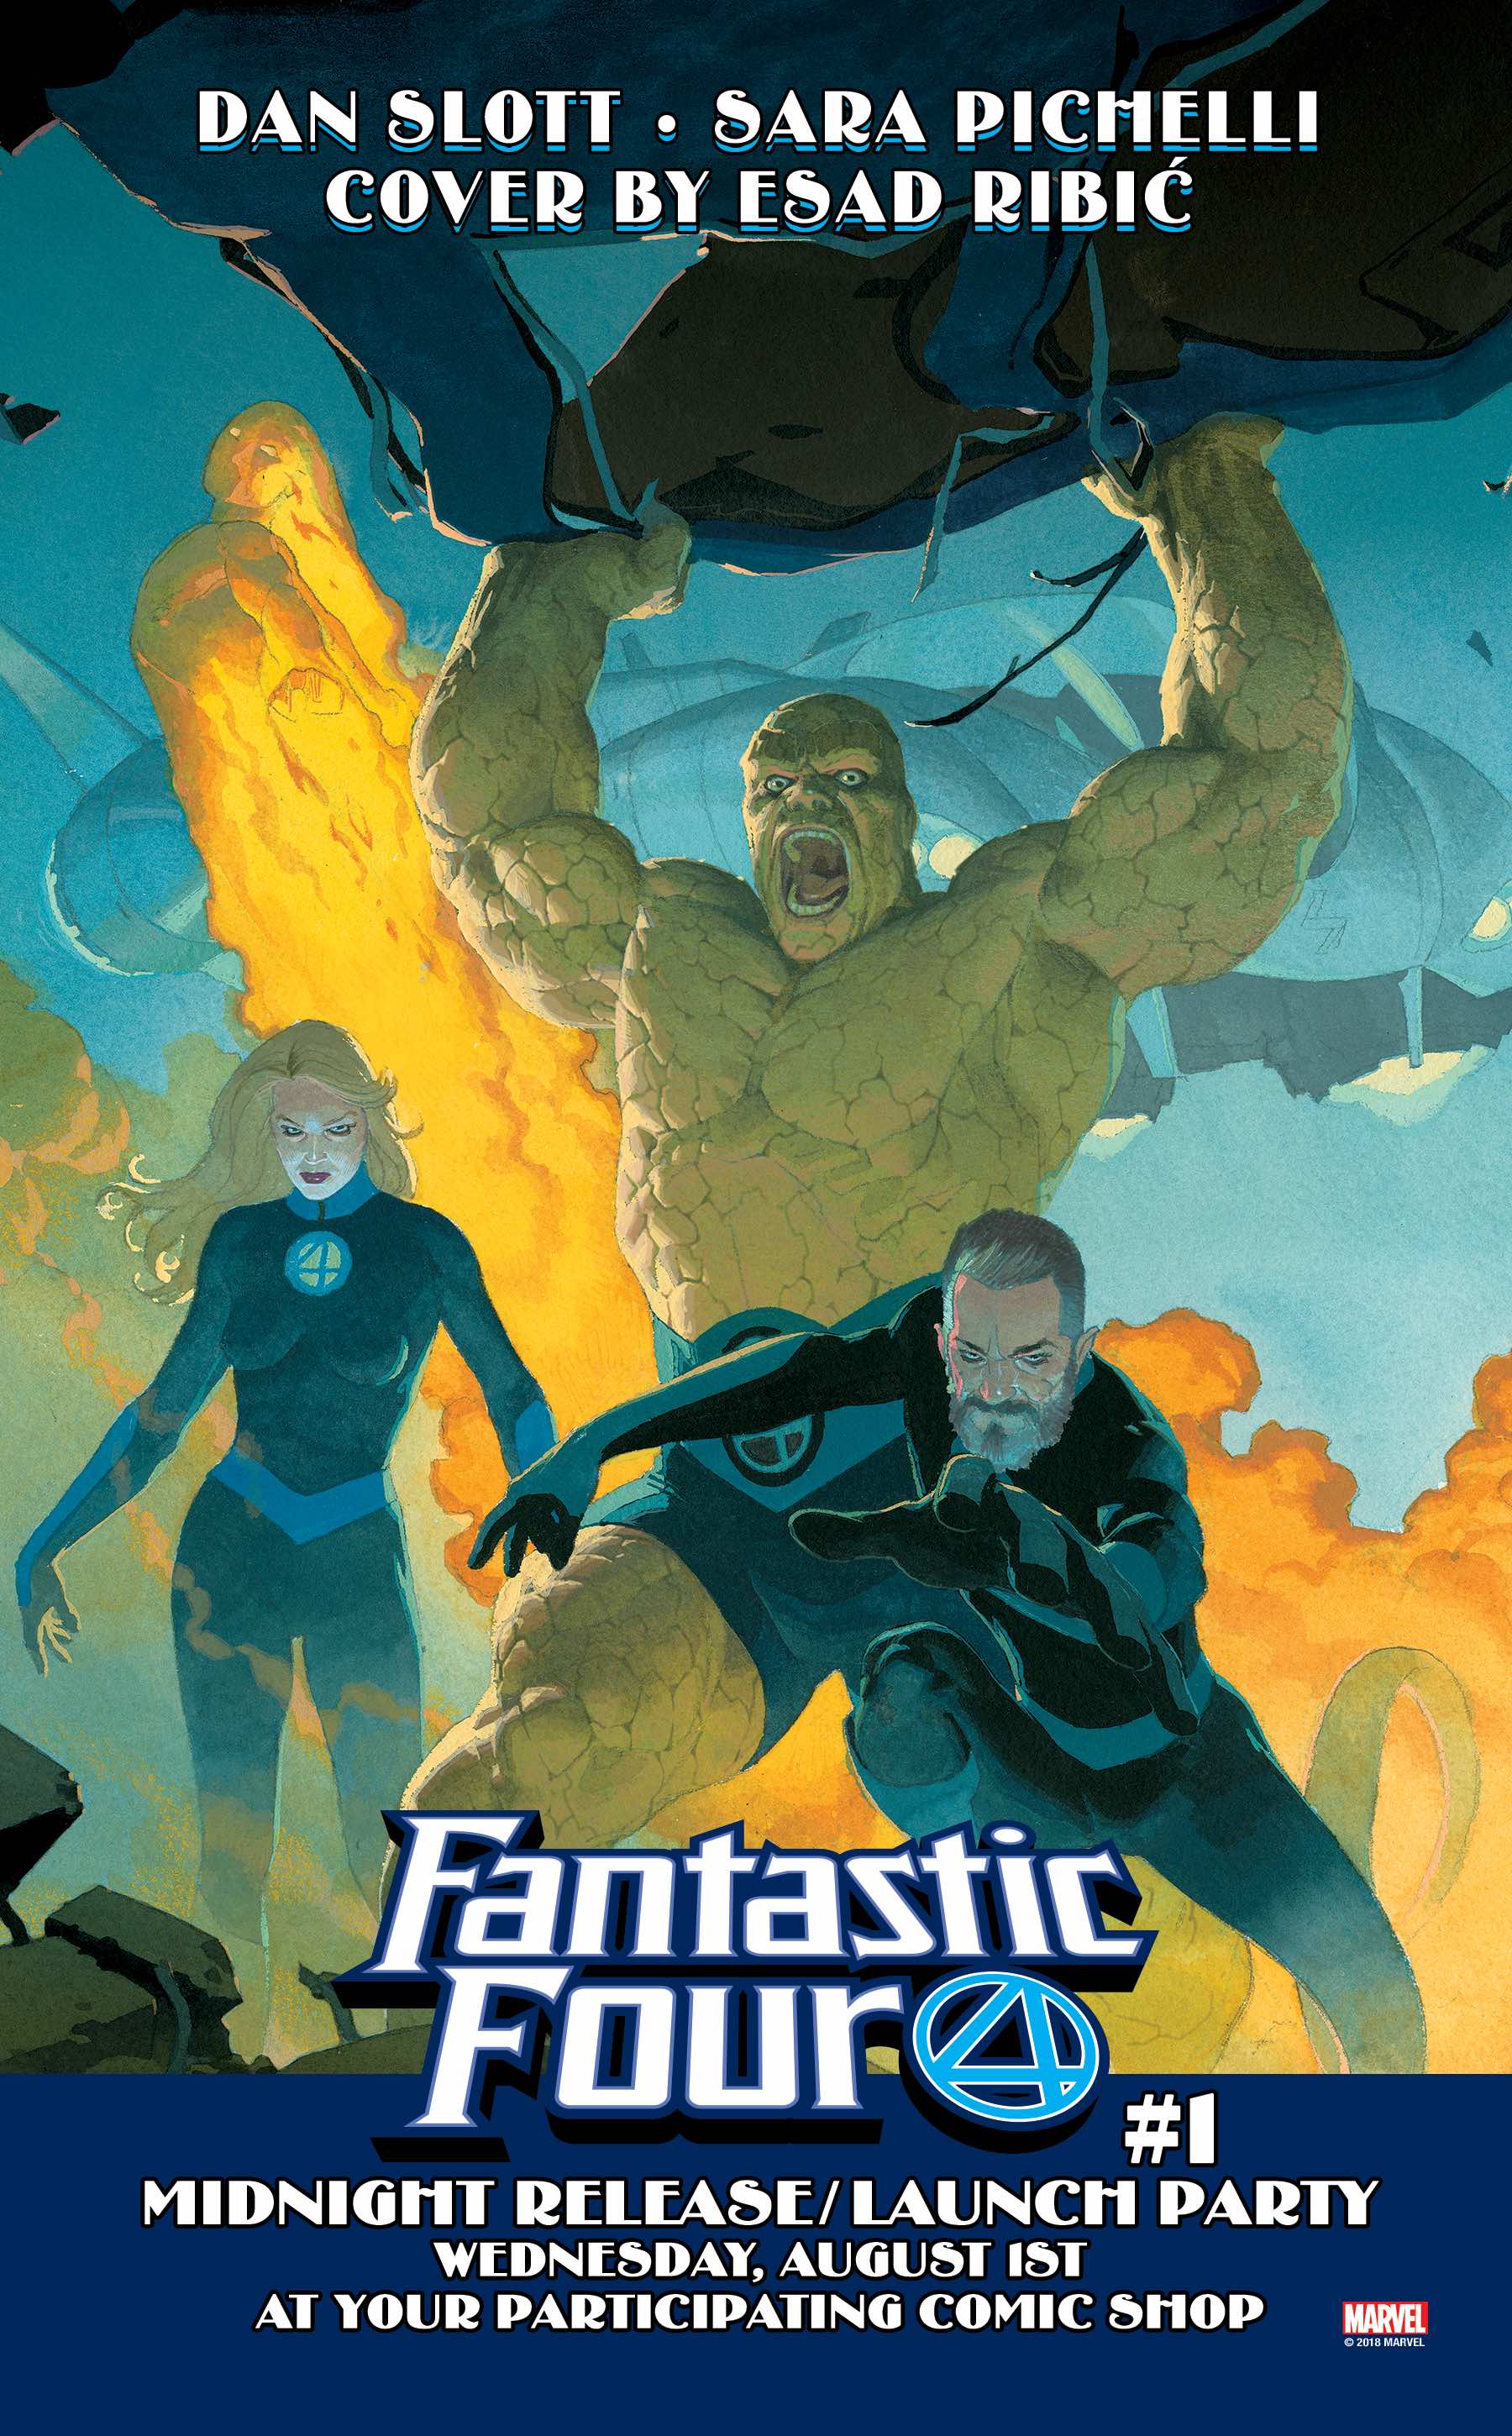 Celebrate the Fantastic Four at midnight release launch parties